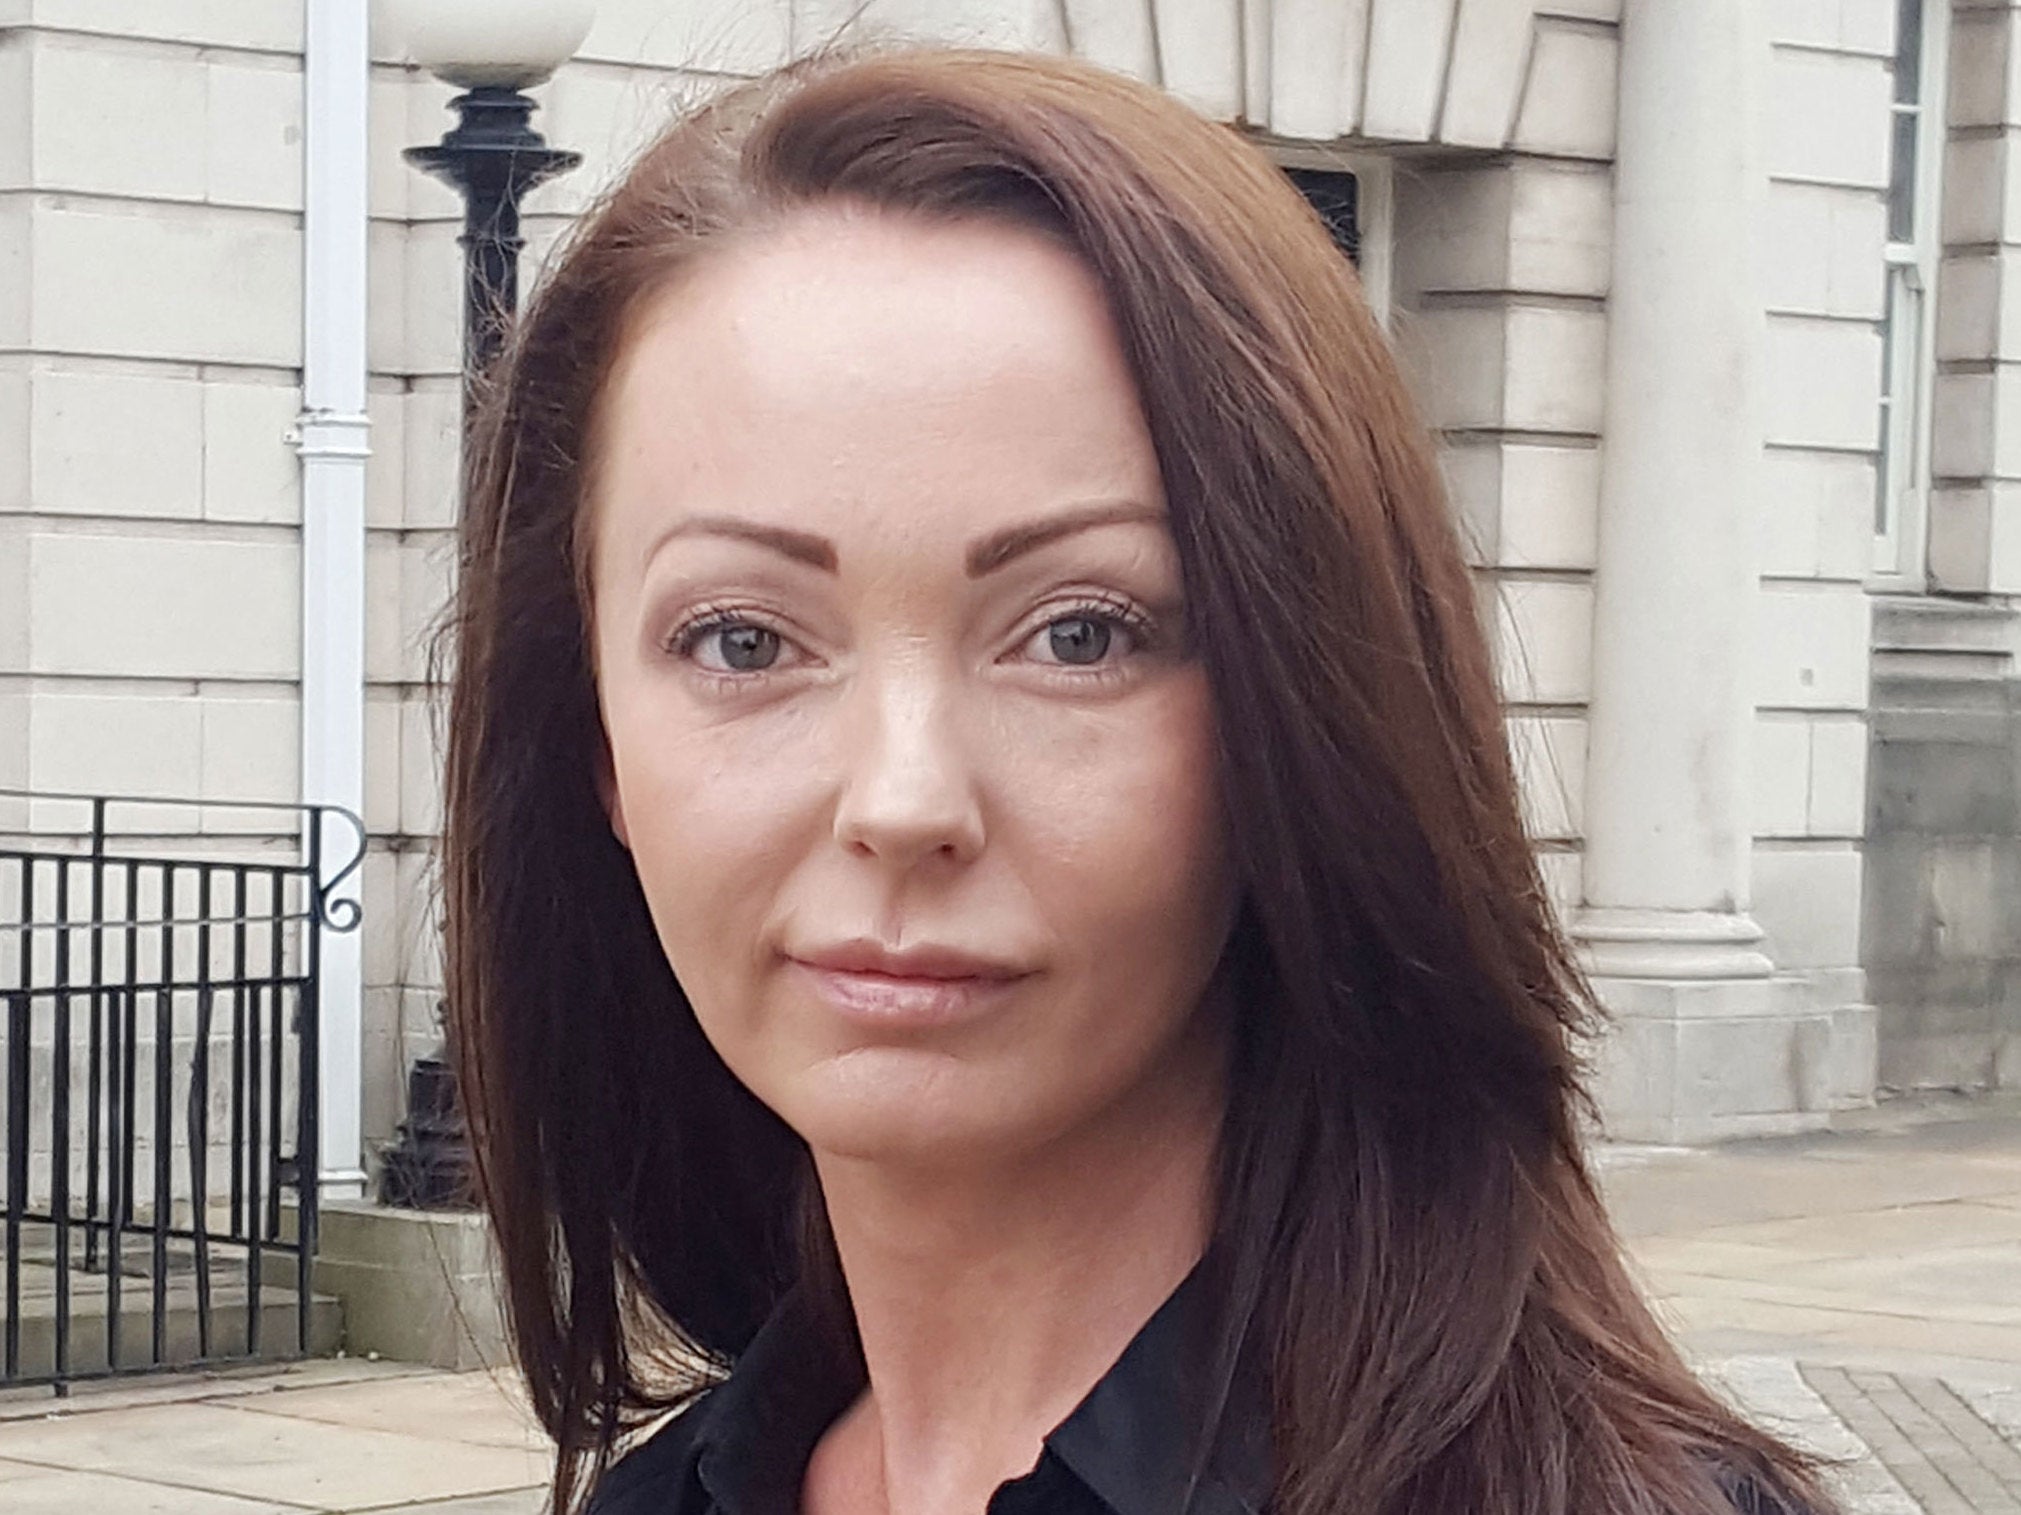 Sammy Woodhouse, a survivor of the Rotherham child sexual exploitation scandal, says councils should be given more cash from central government to prevent abuse